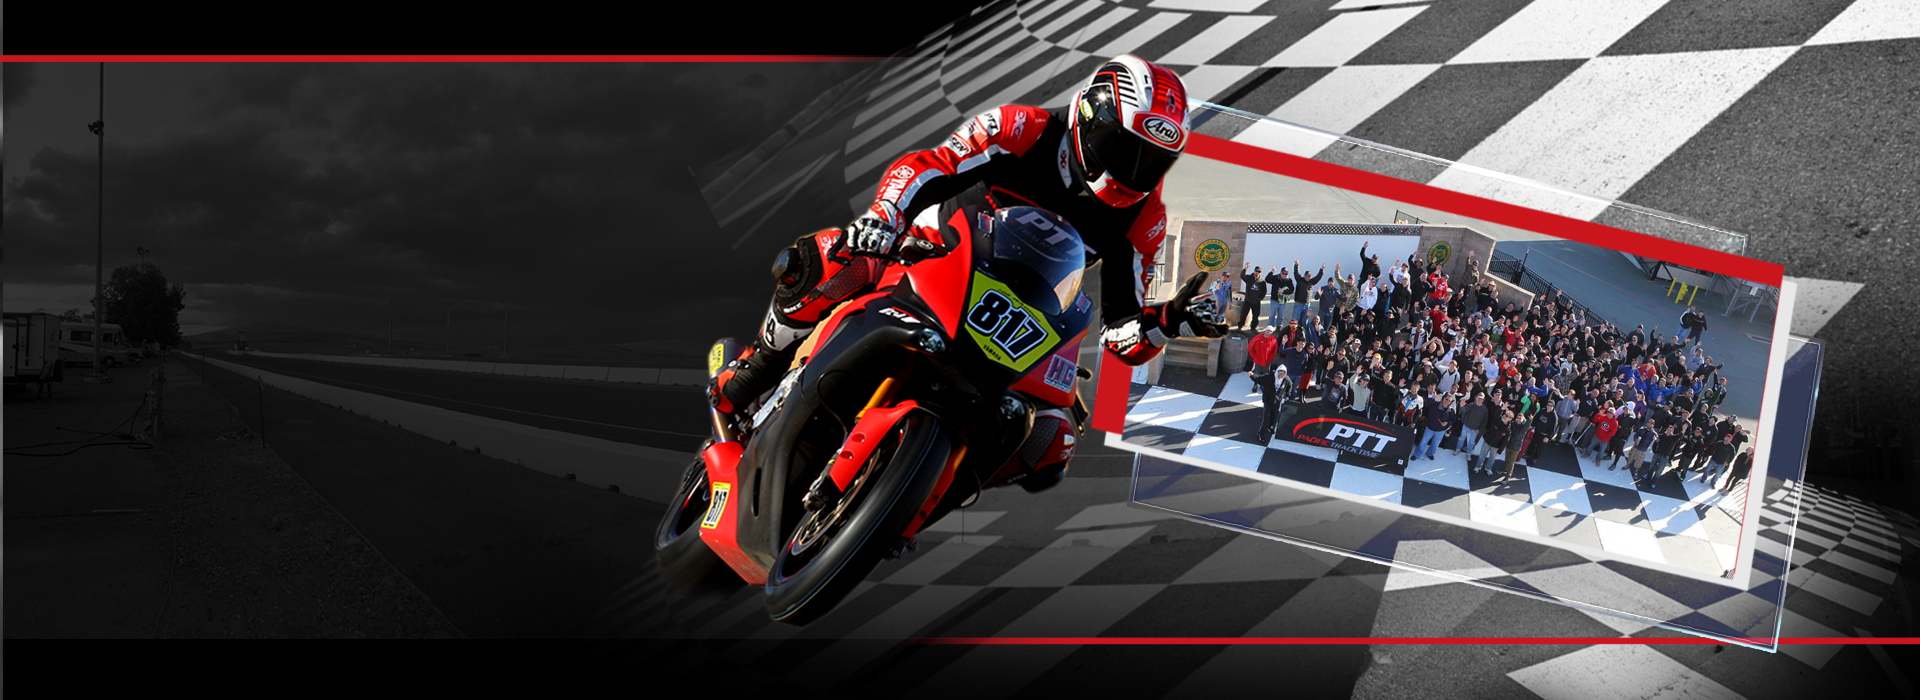 Pacific Track Time - The Leading Provider of Motorcycle Track Days and ...